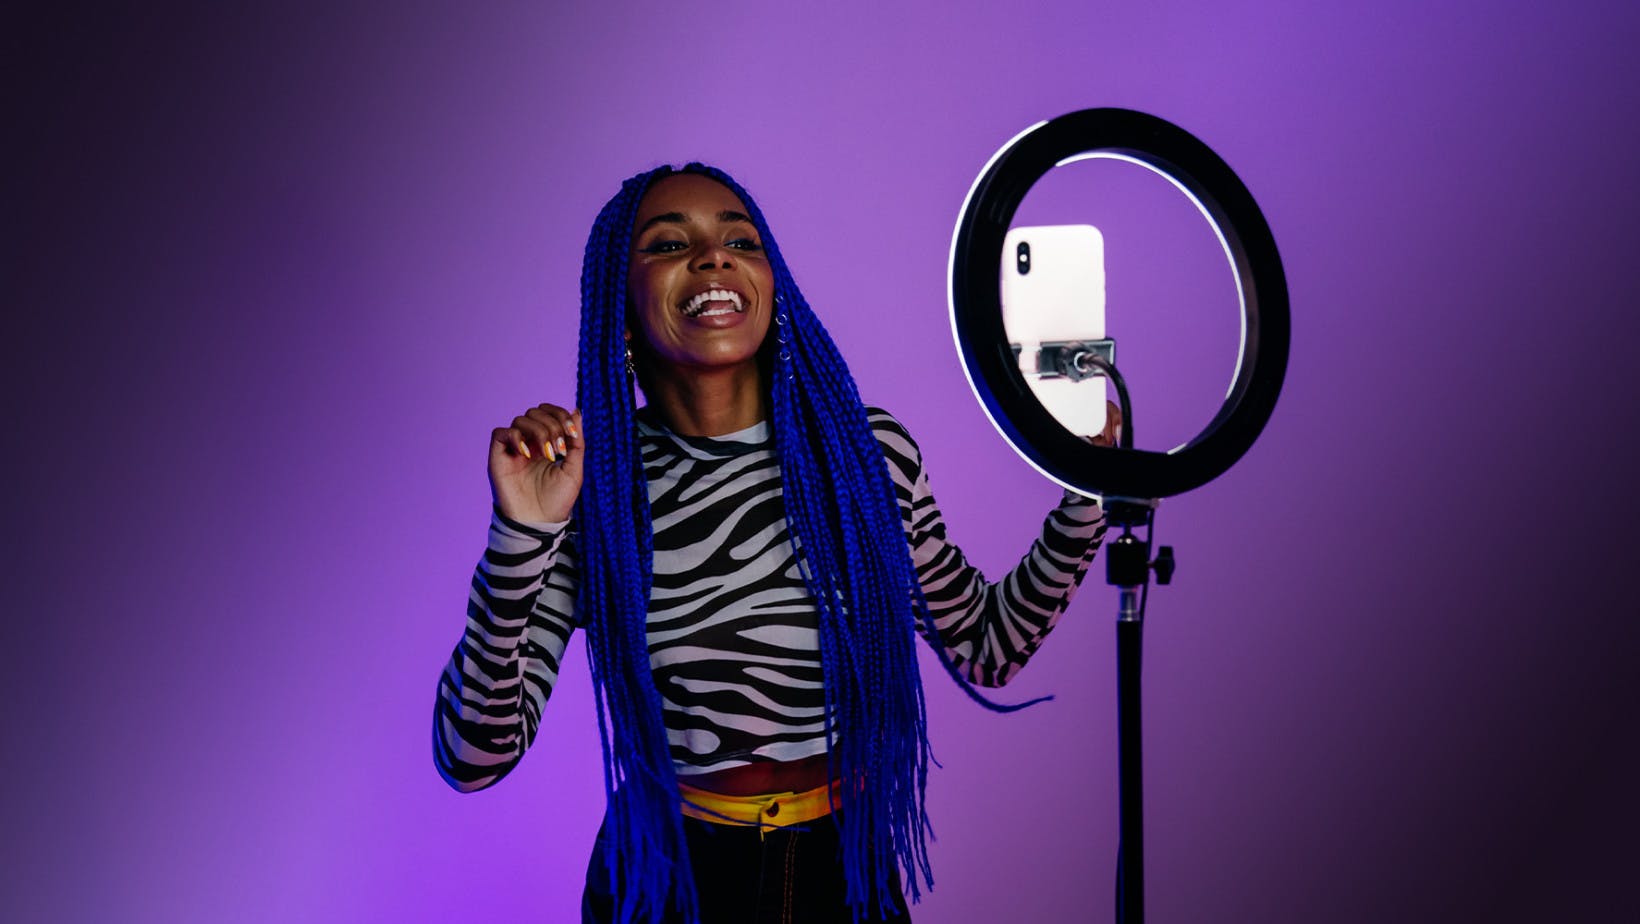 Woman with long blue hair recording herself on her phone with a ring light